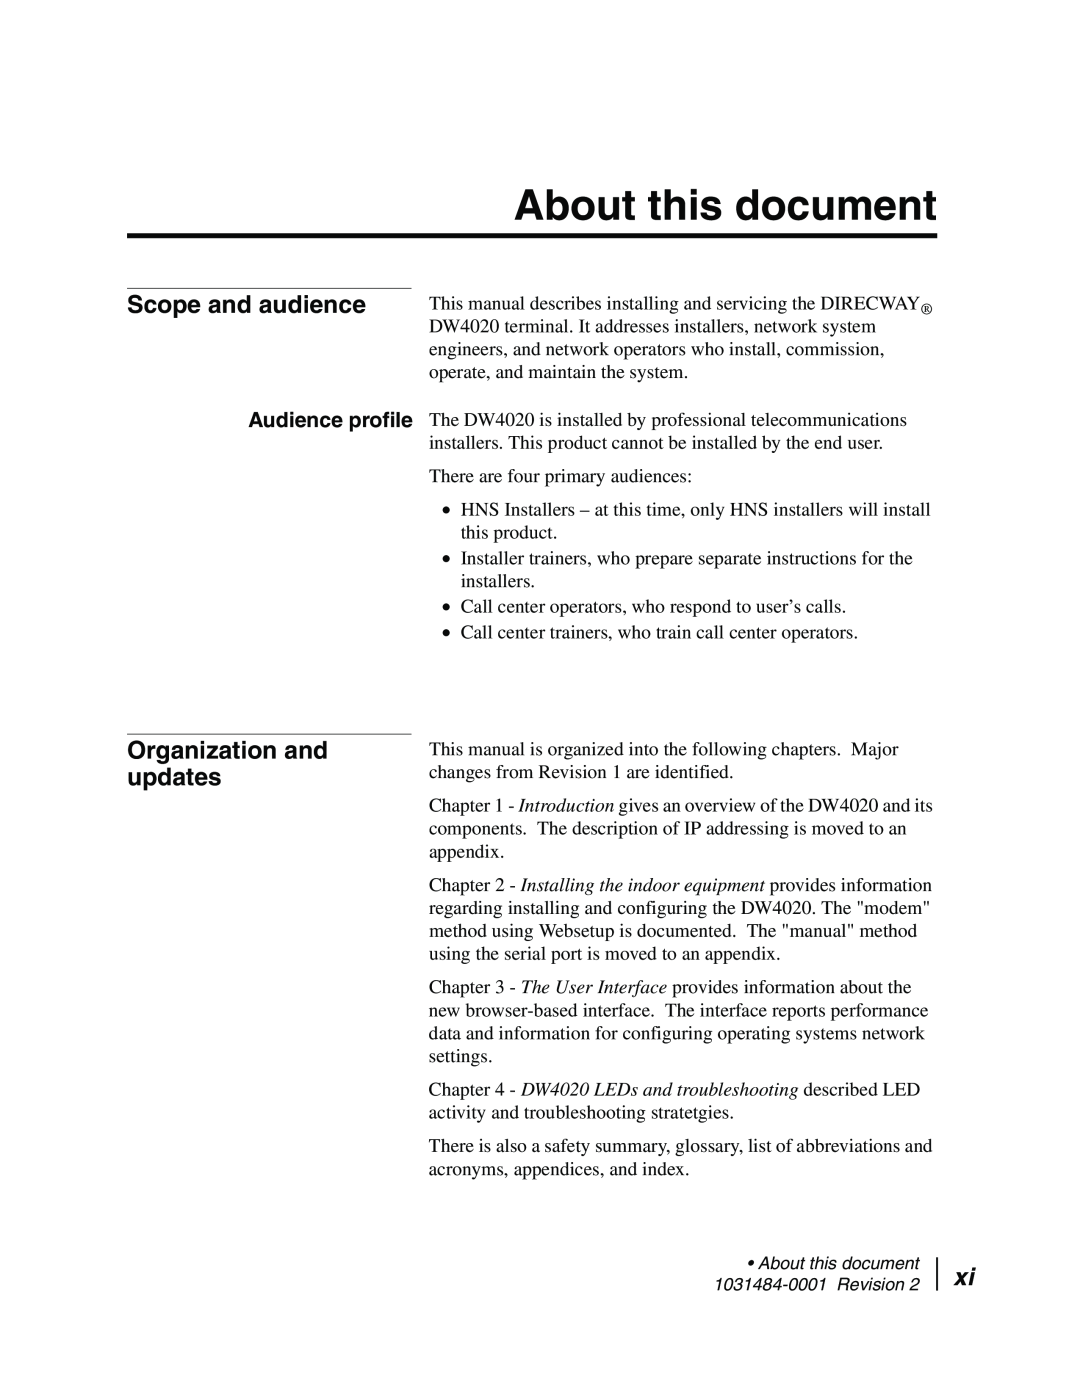 Hughes DW4020 manual About this document, Scope and audience, Organization and updates, Audience profile 